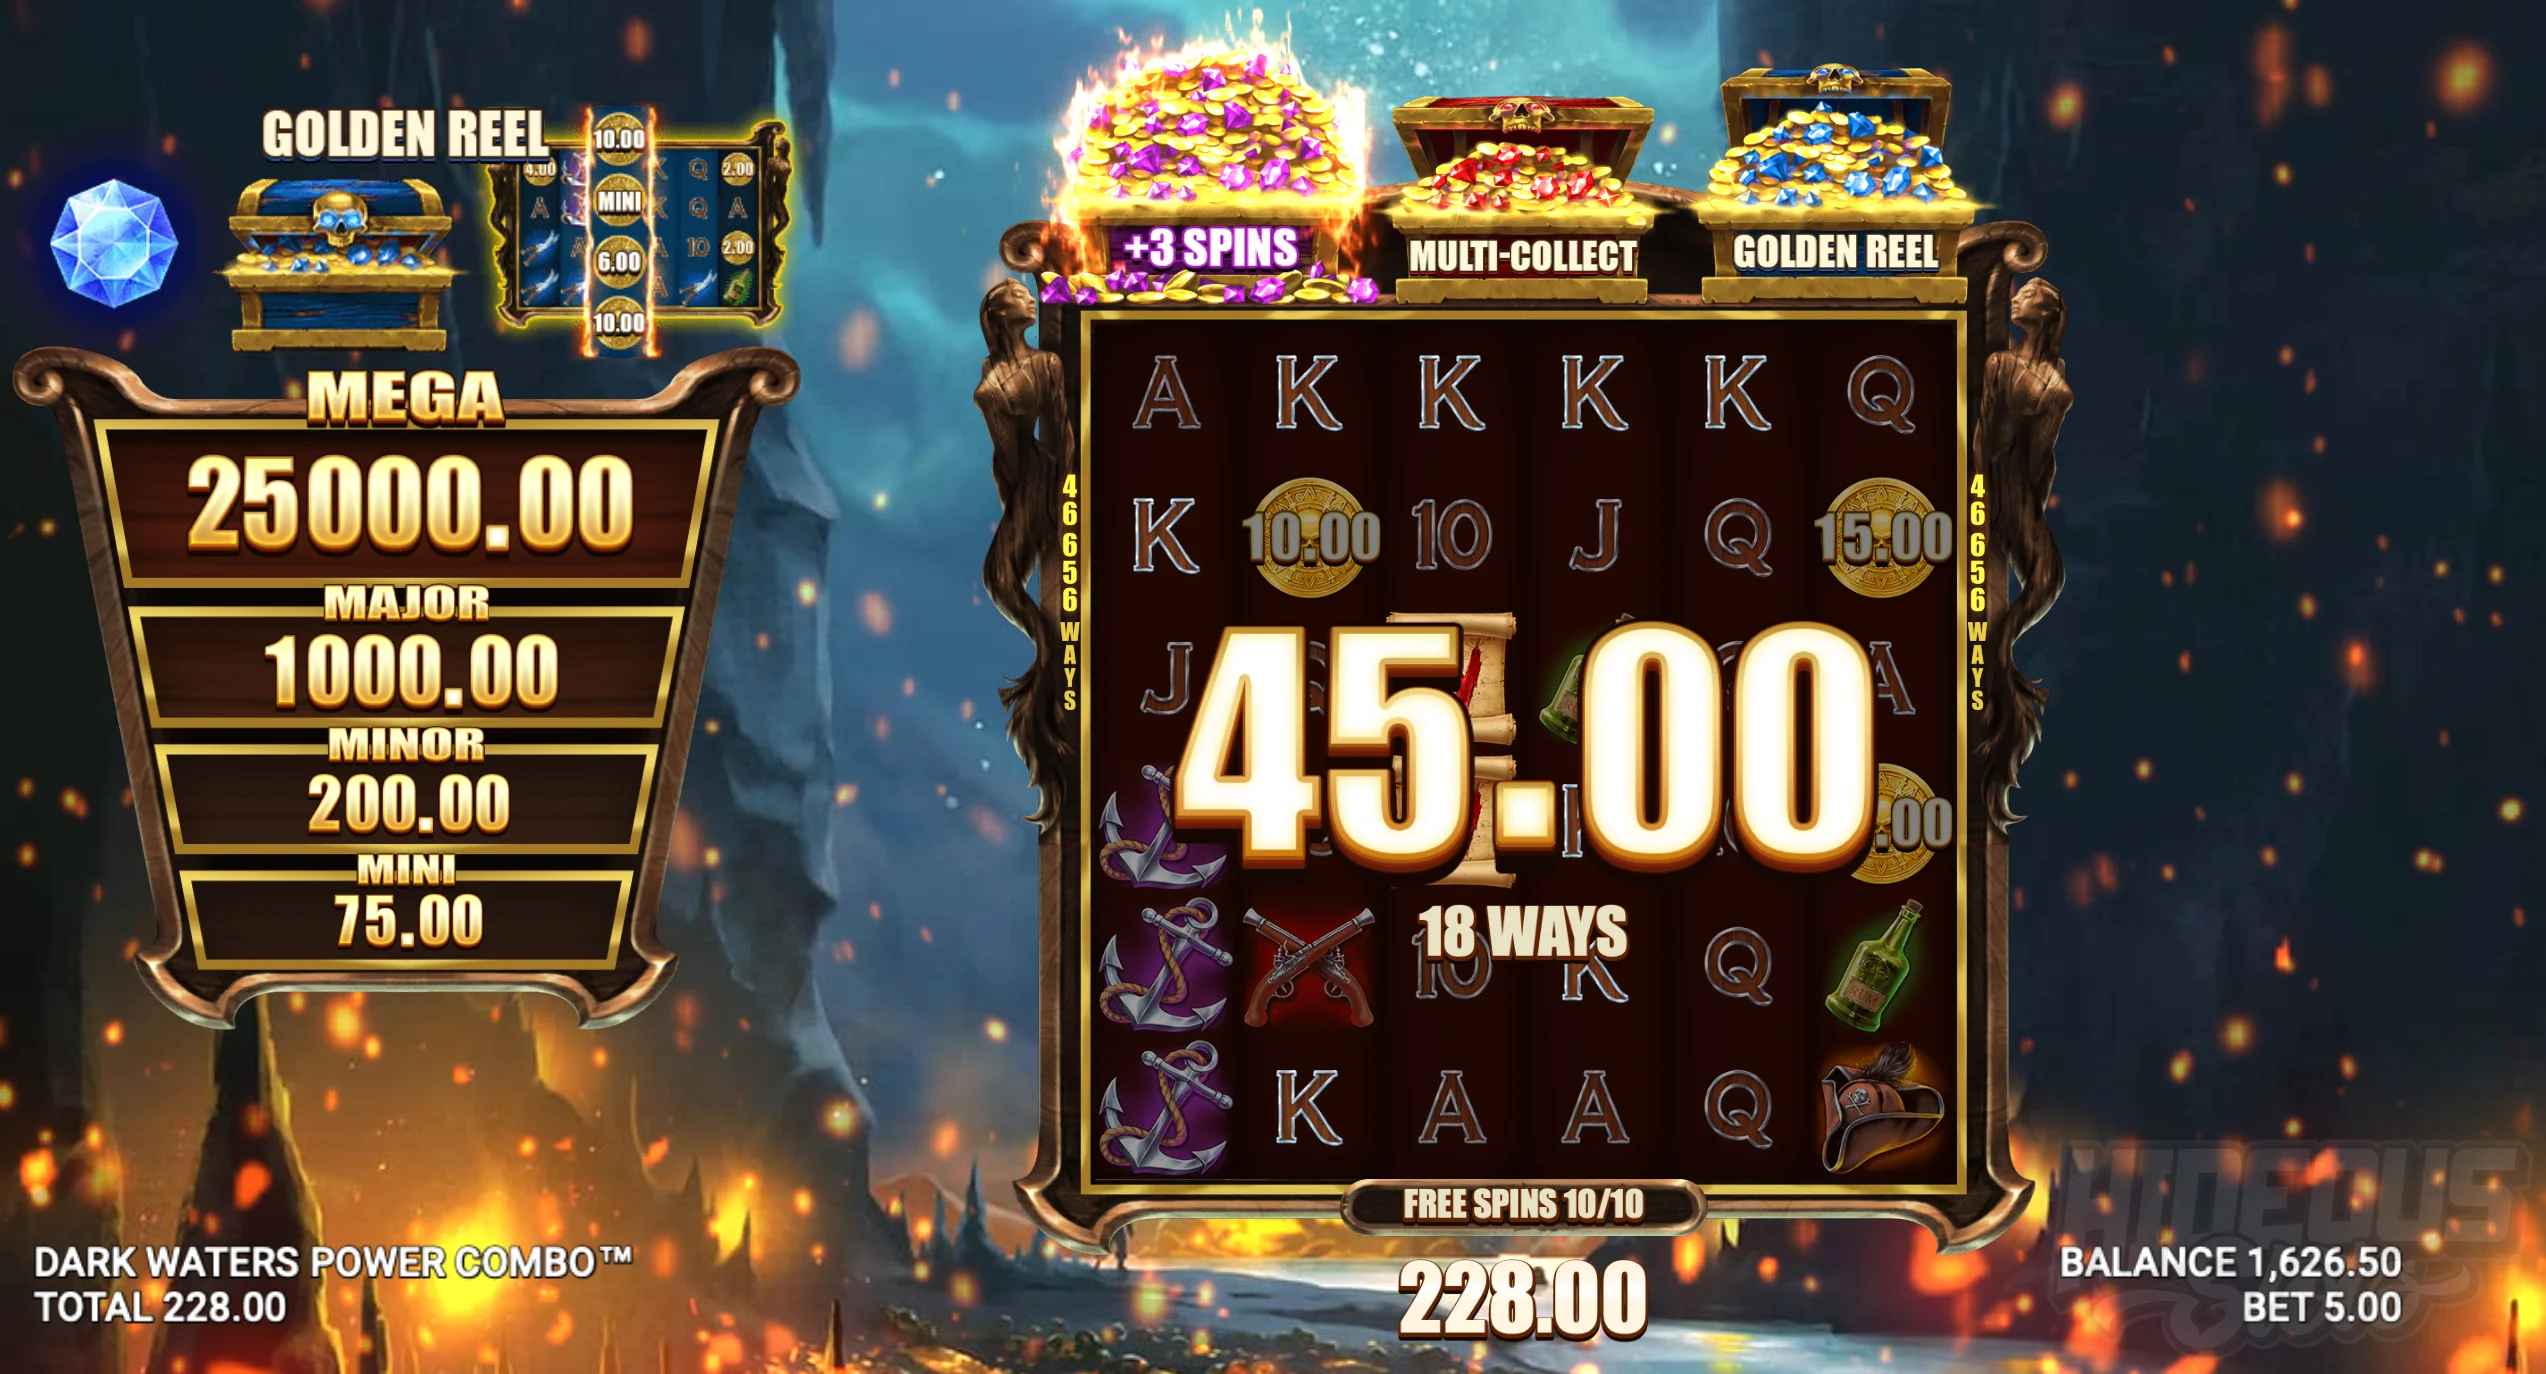 Dark Waters Power Combo Free Spins With Giant Reels Feature